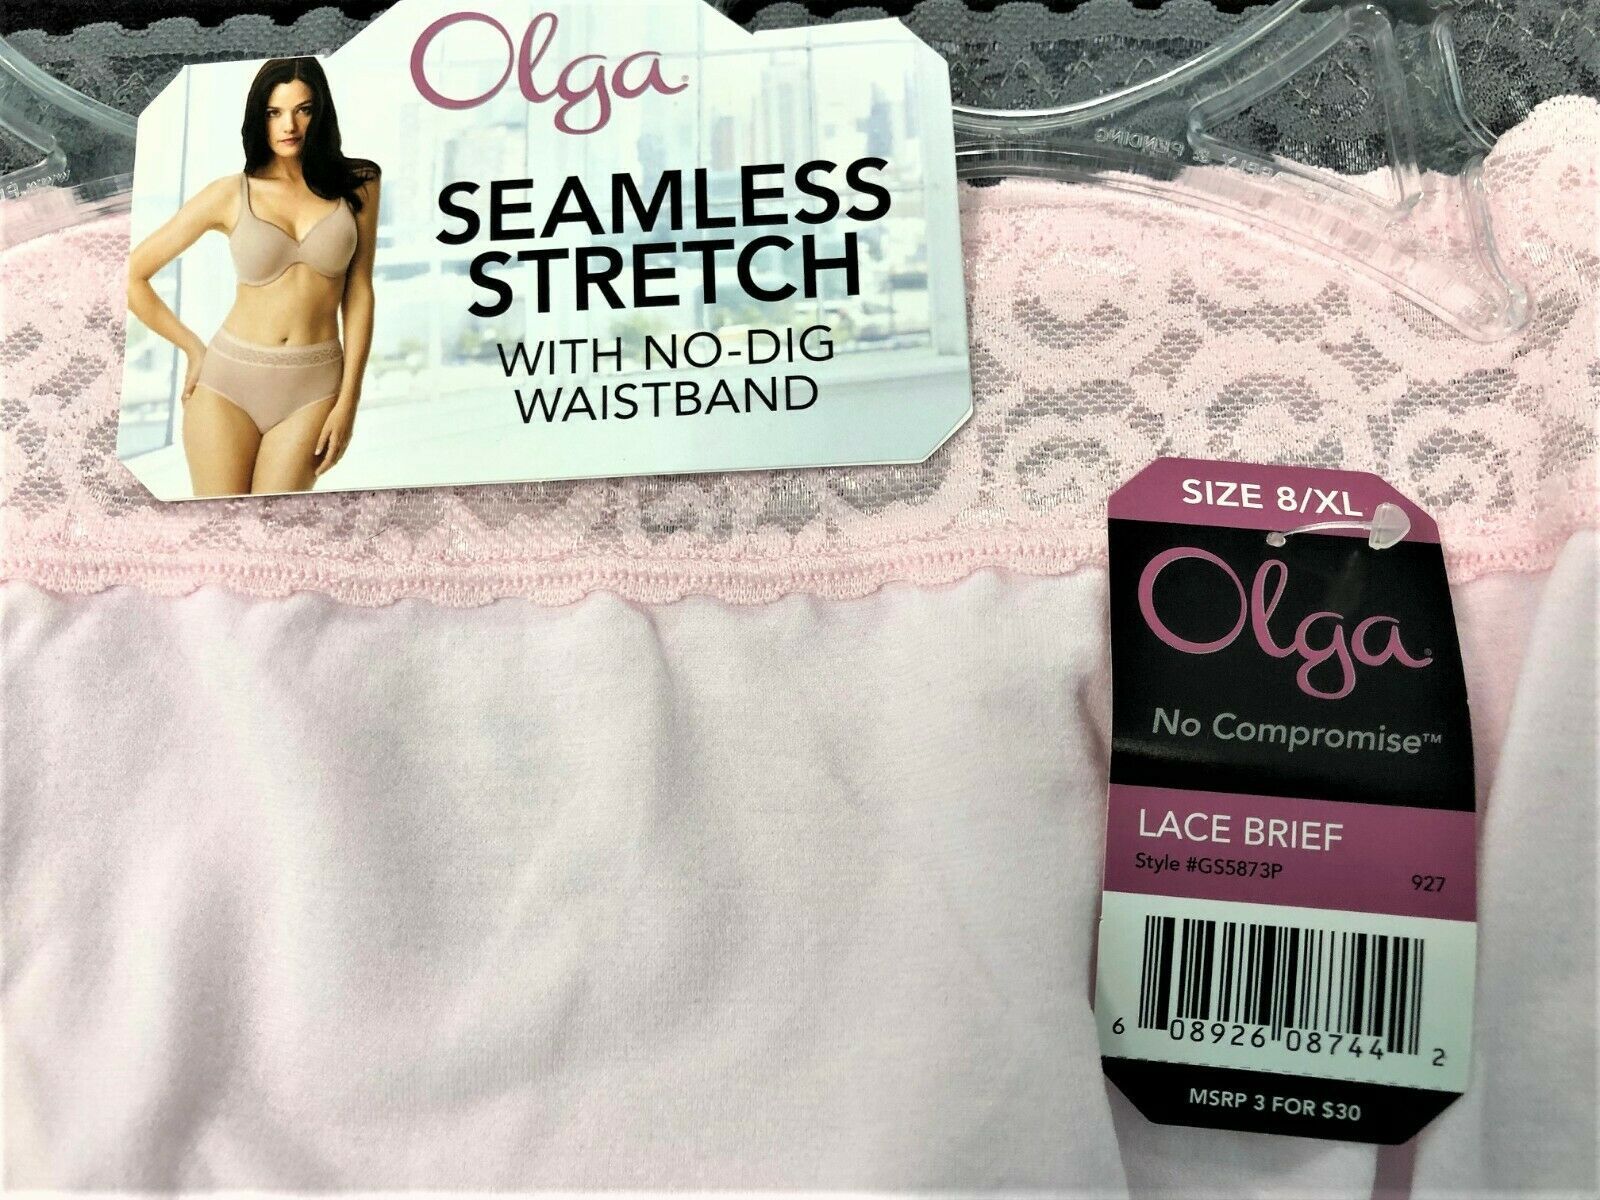 Olga No Compromise Seamless Stretch No Dig and 50 similar items